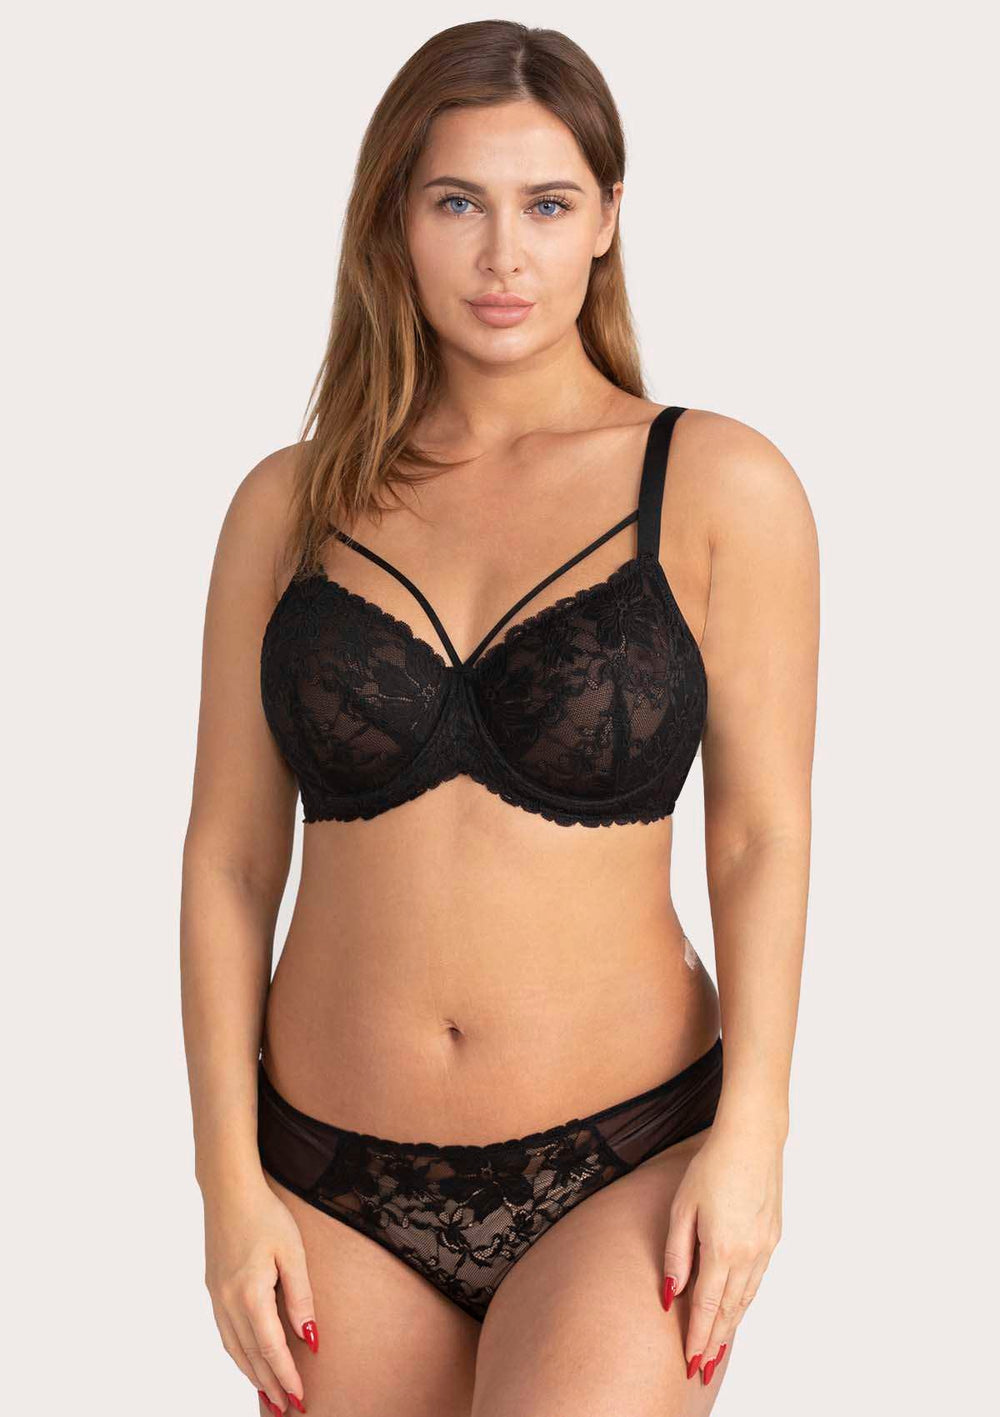 Buy HSIA Minimizer Bra for Women,Unlined Non Padded Lace Sexy Plus Size Bras  Full Figure Black Bras